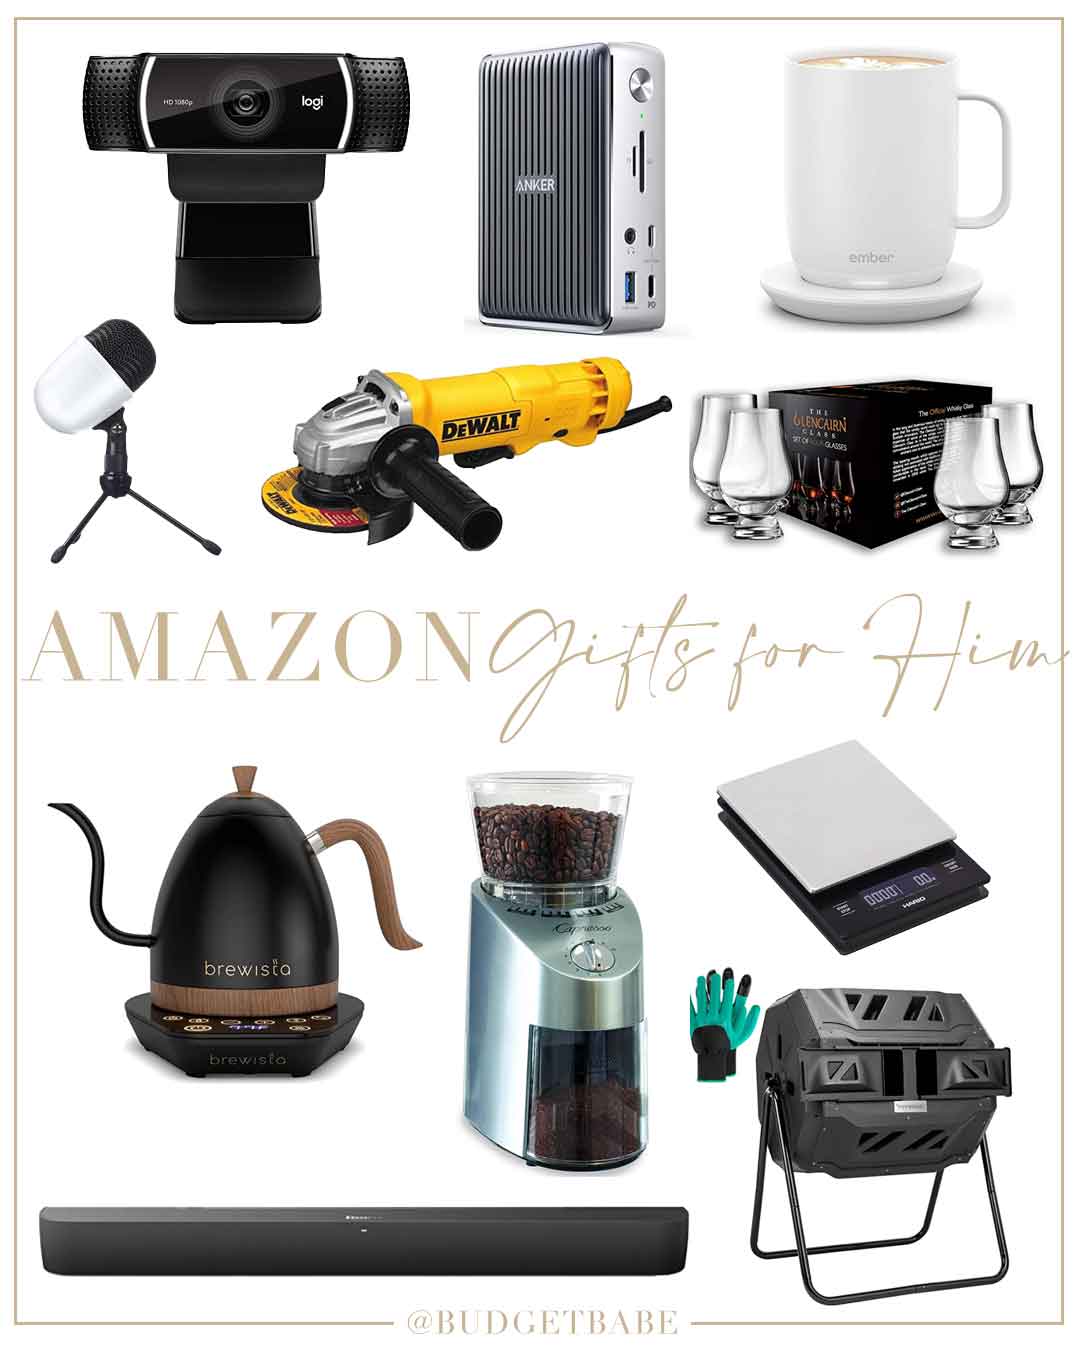 Amazon gift guide for guys, men, fathers, husbands, boyfriends, brothers, holiday edition